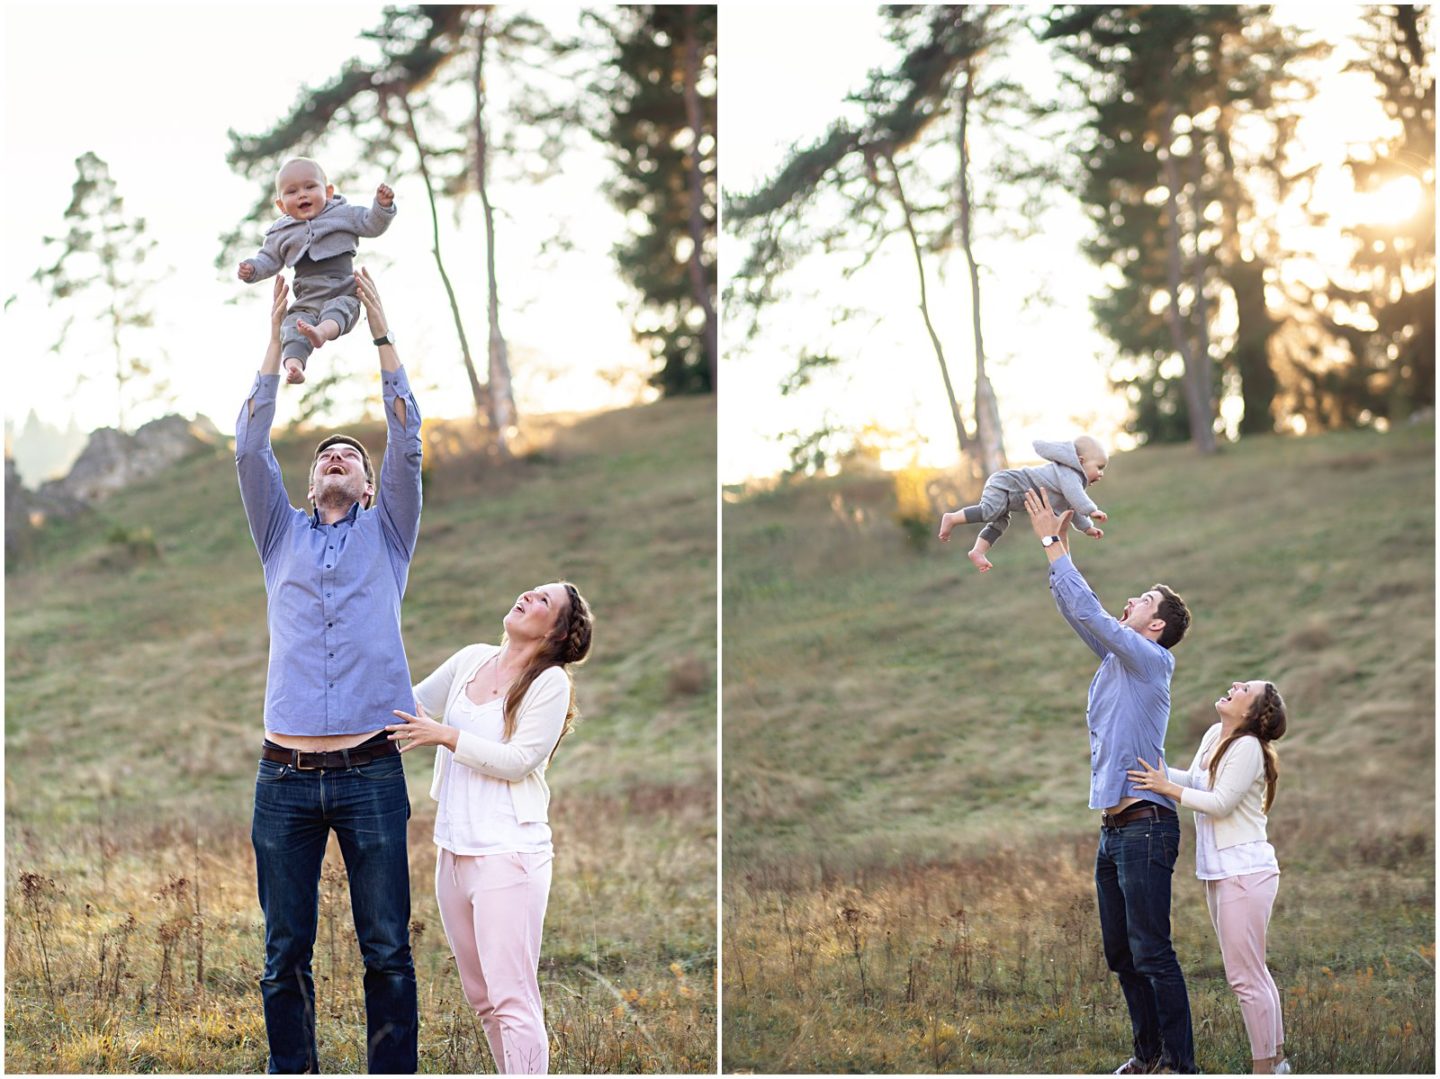 dad and mom throwing baby in air laughing connecticut photographer